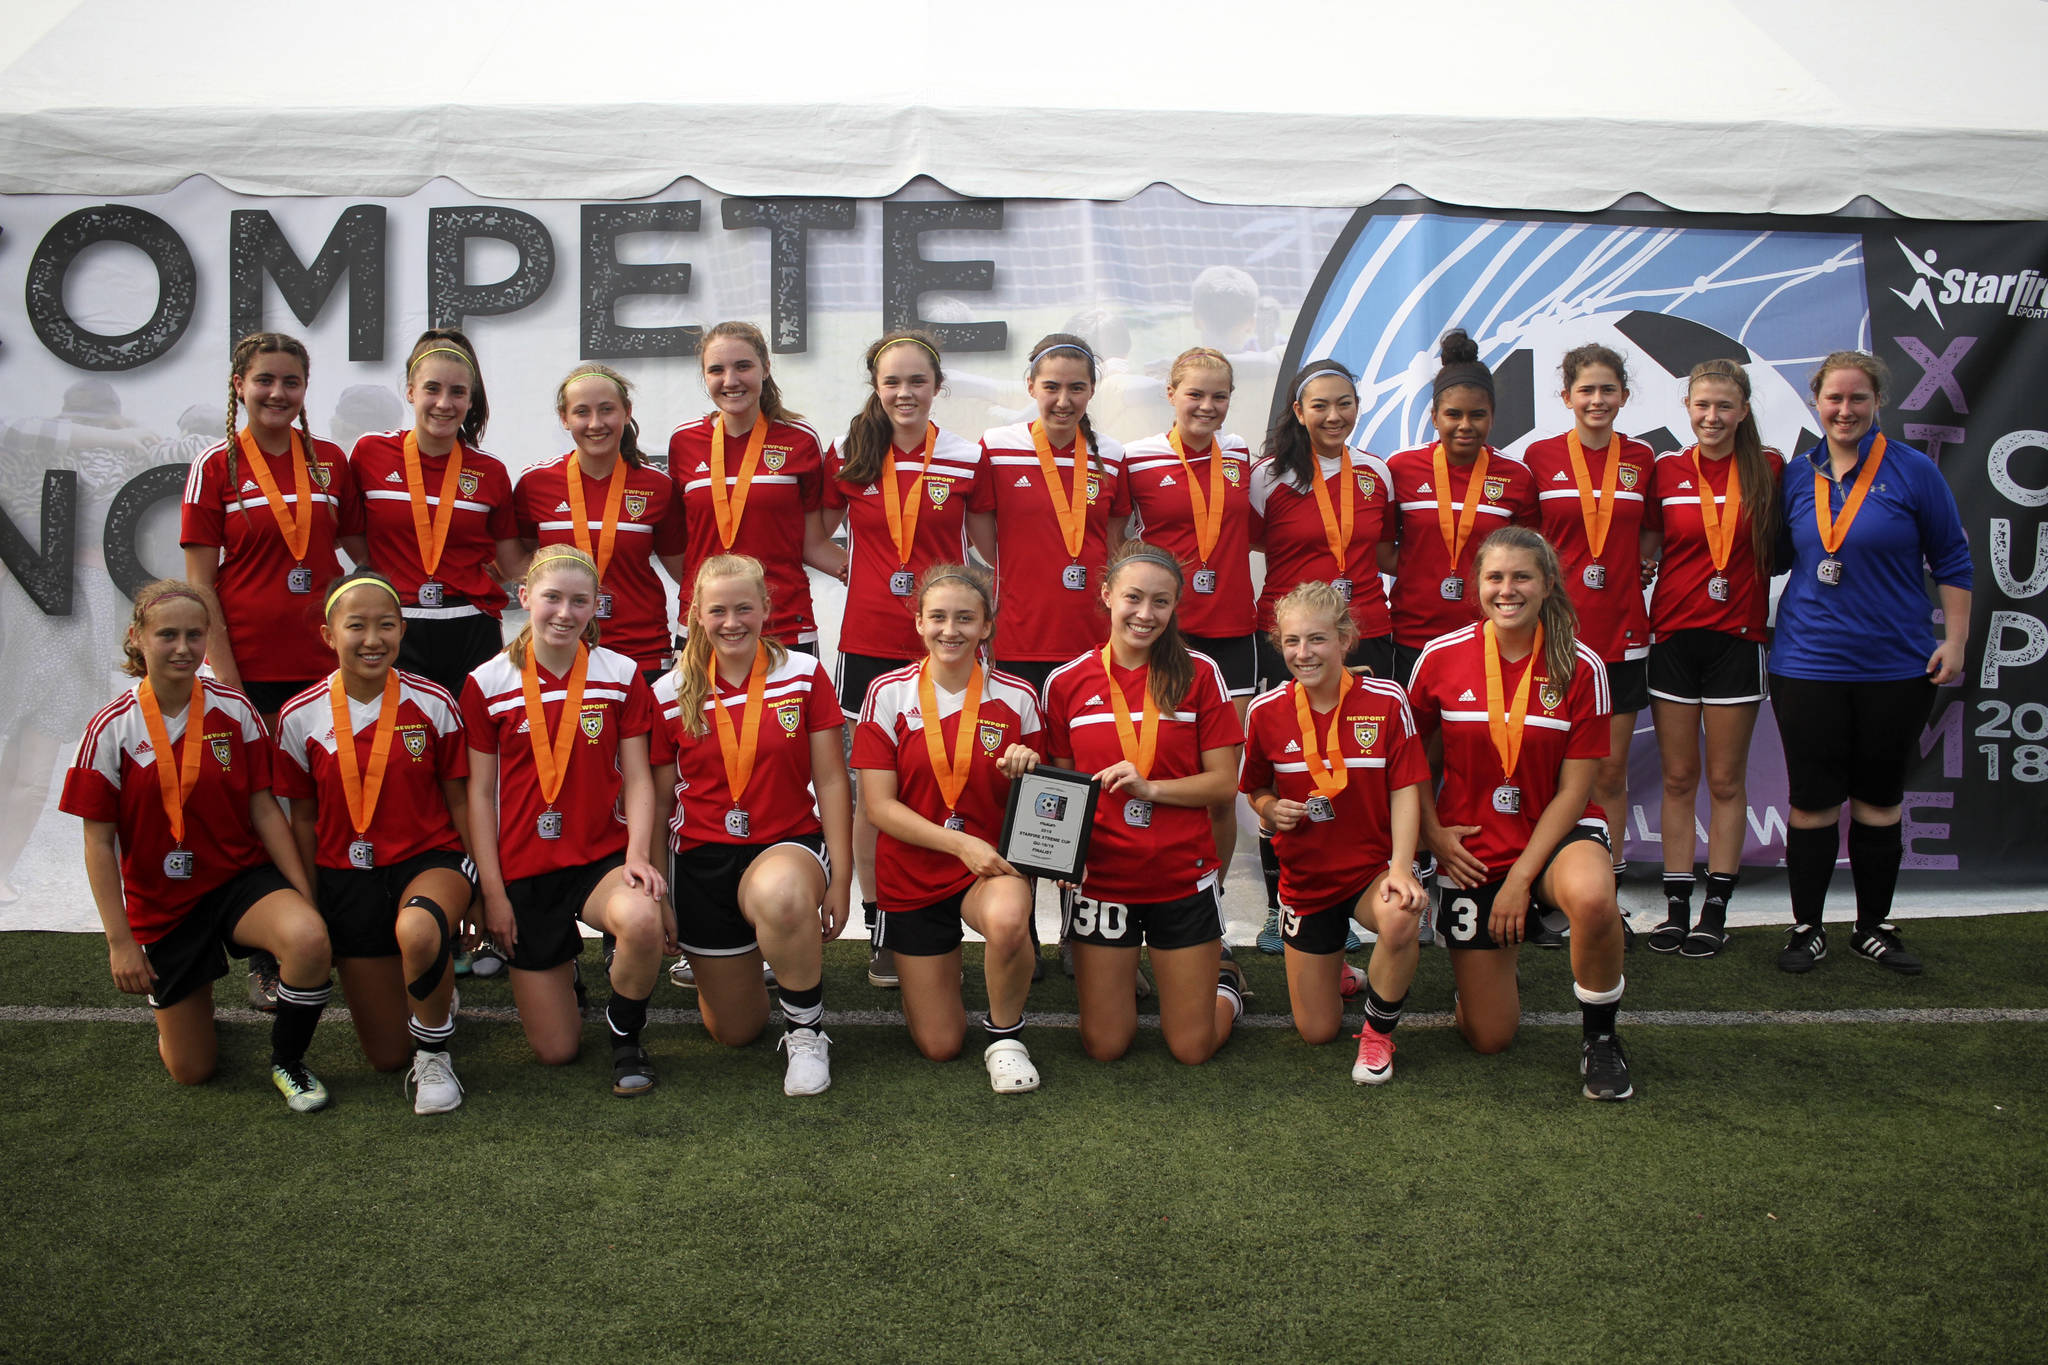 The Newport U18-U19 girls select soccer team captured second place at the Starfire Extreme Cup on Aug. 19 in Tukwila. The Newport squad lost 6-5 in penalty kicks to Kent United in the title game. Mercer Island athletes on the roster pictured consisted of Isabella Mancusco, MaKena French, Lucy Cleator, Lilly Pruchno, Caitlin Liang and Haley Selman. Photo courtesy of Dana Pruchno